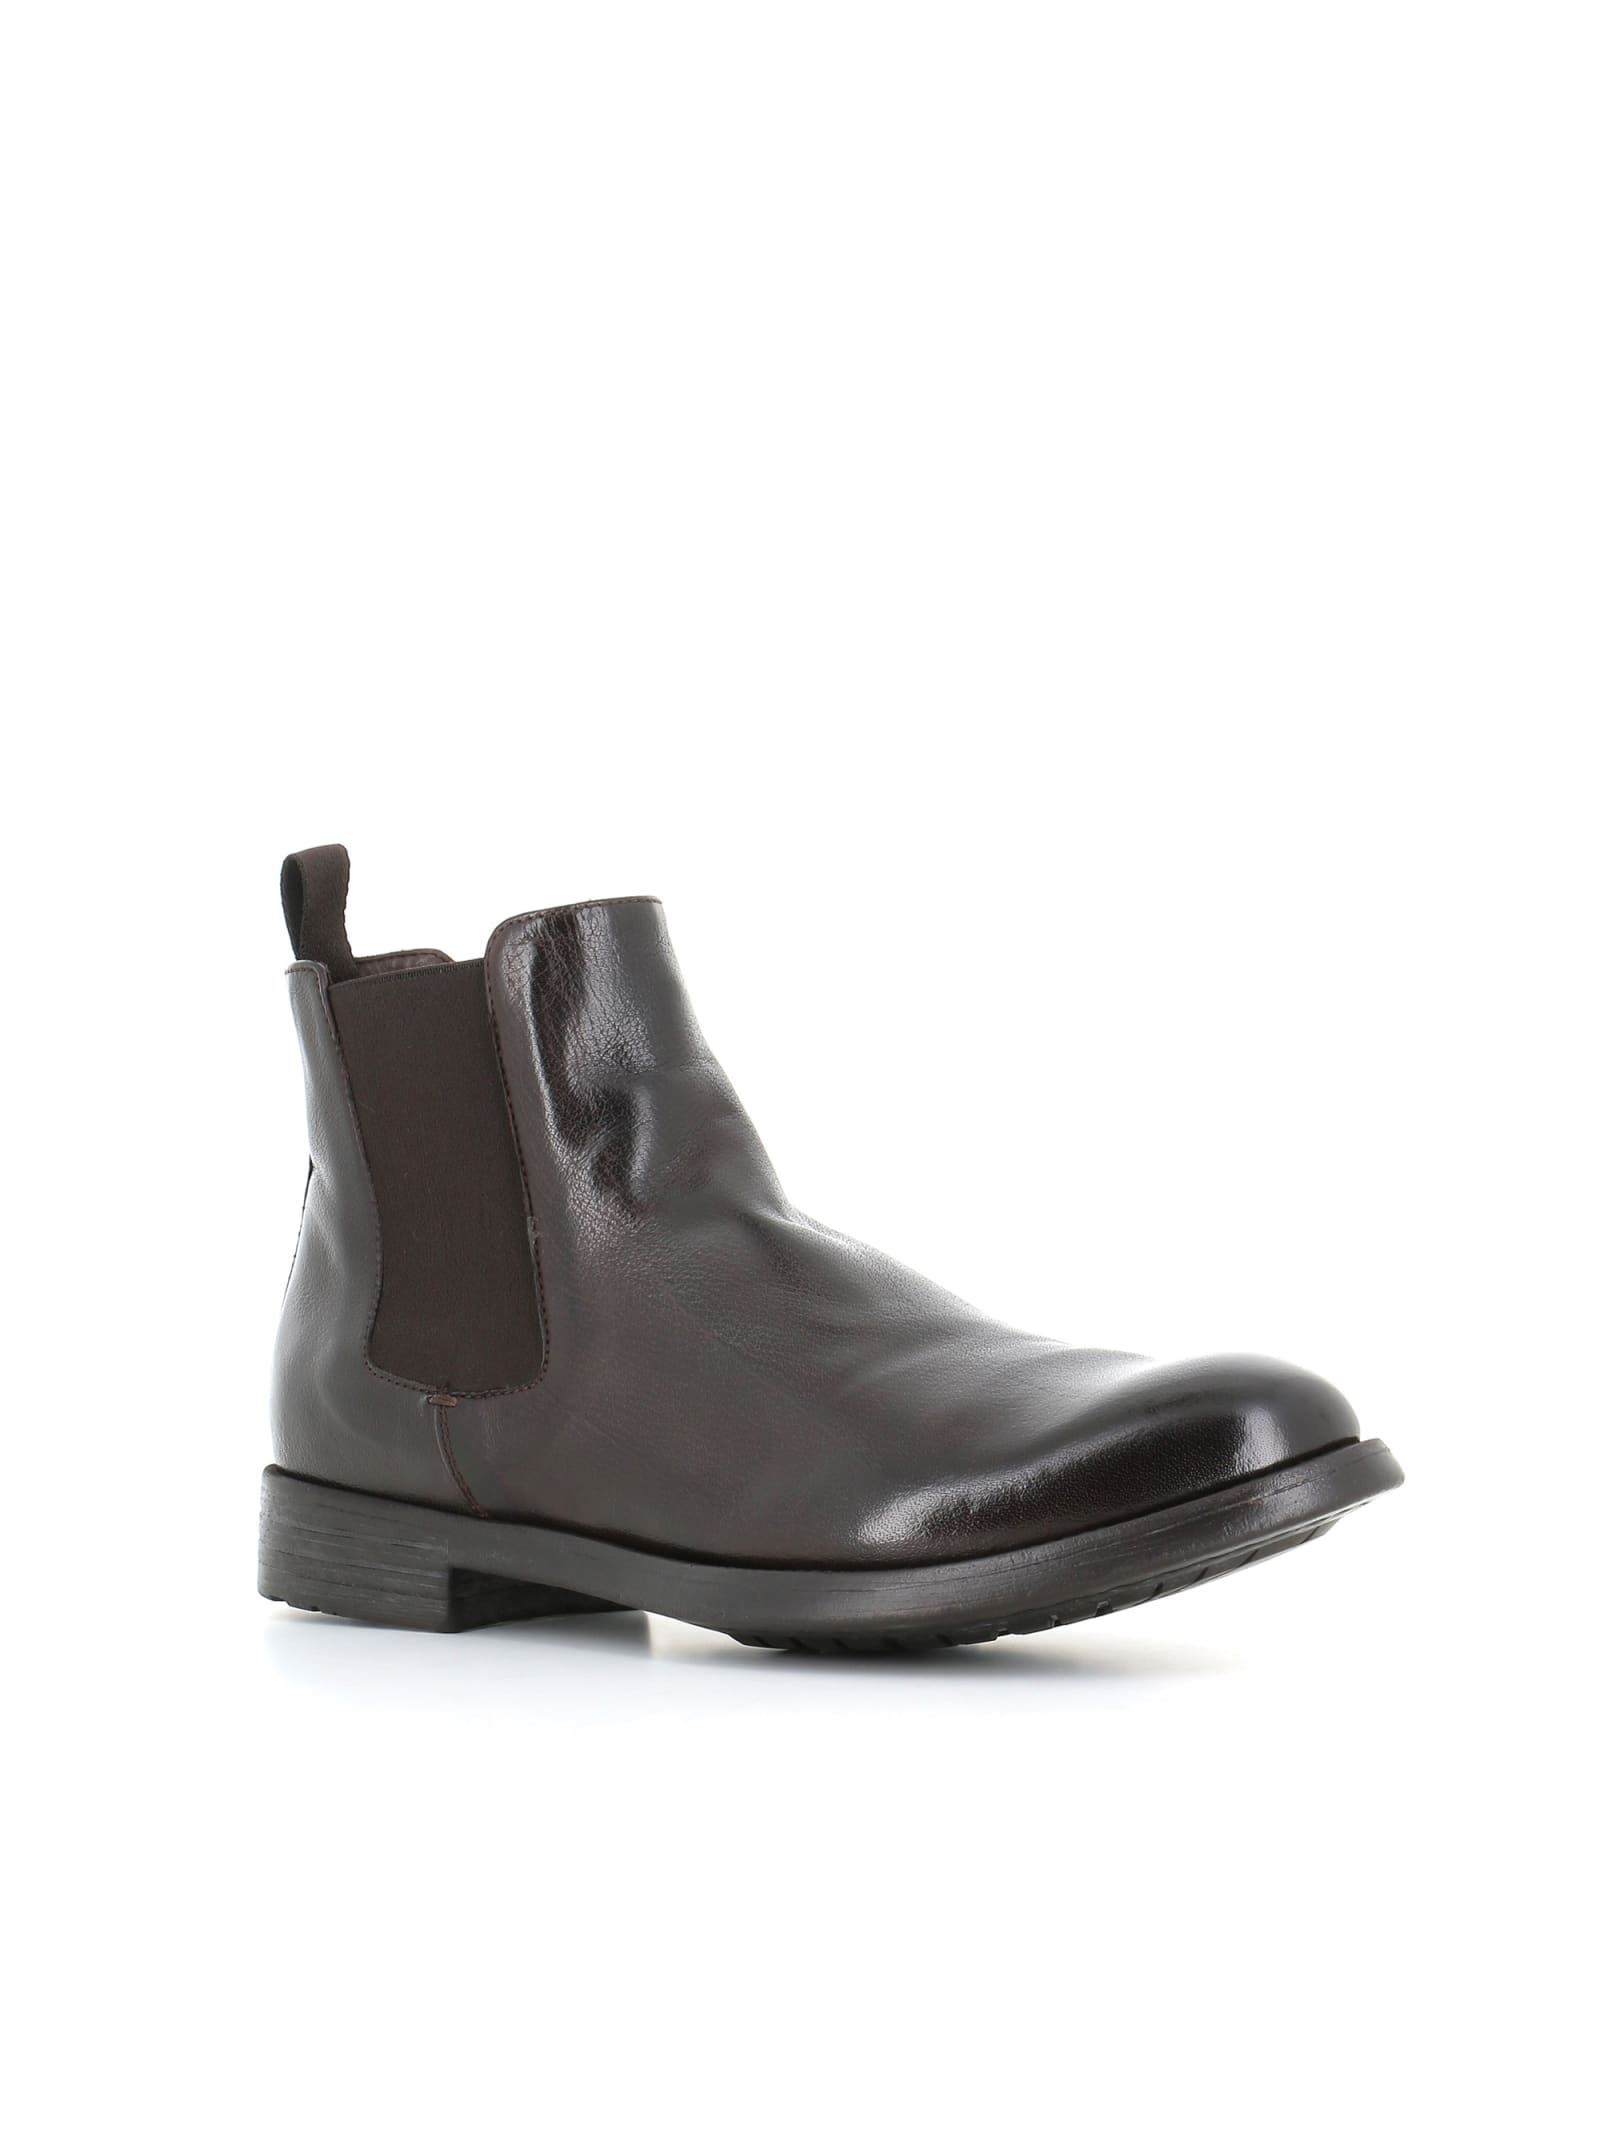 Shop Officine Creative Chelsea Boot Hive/007 In Ebony